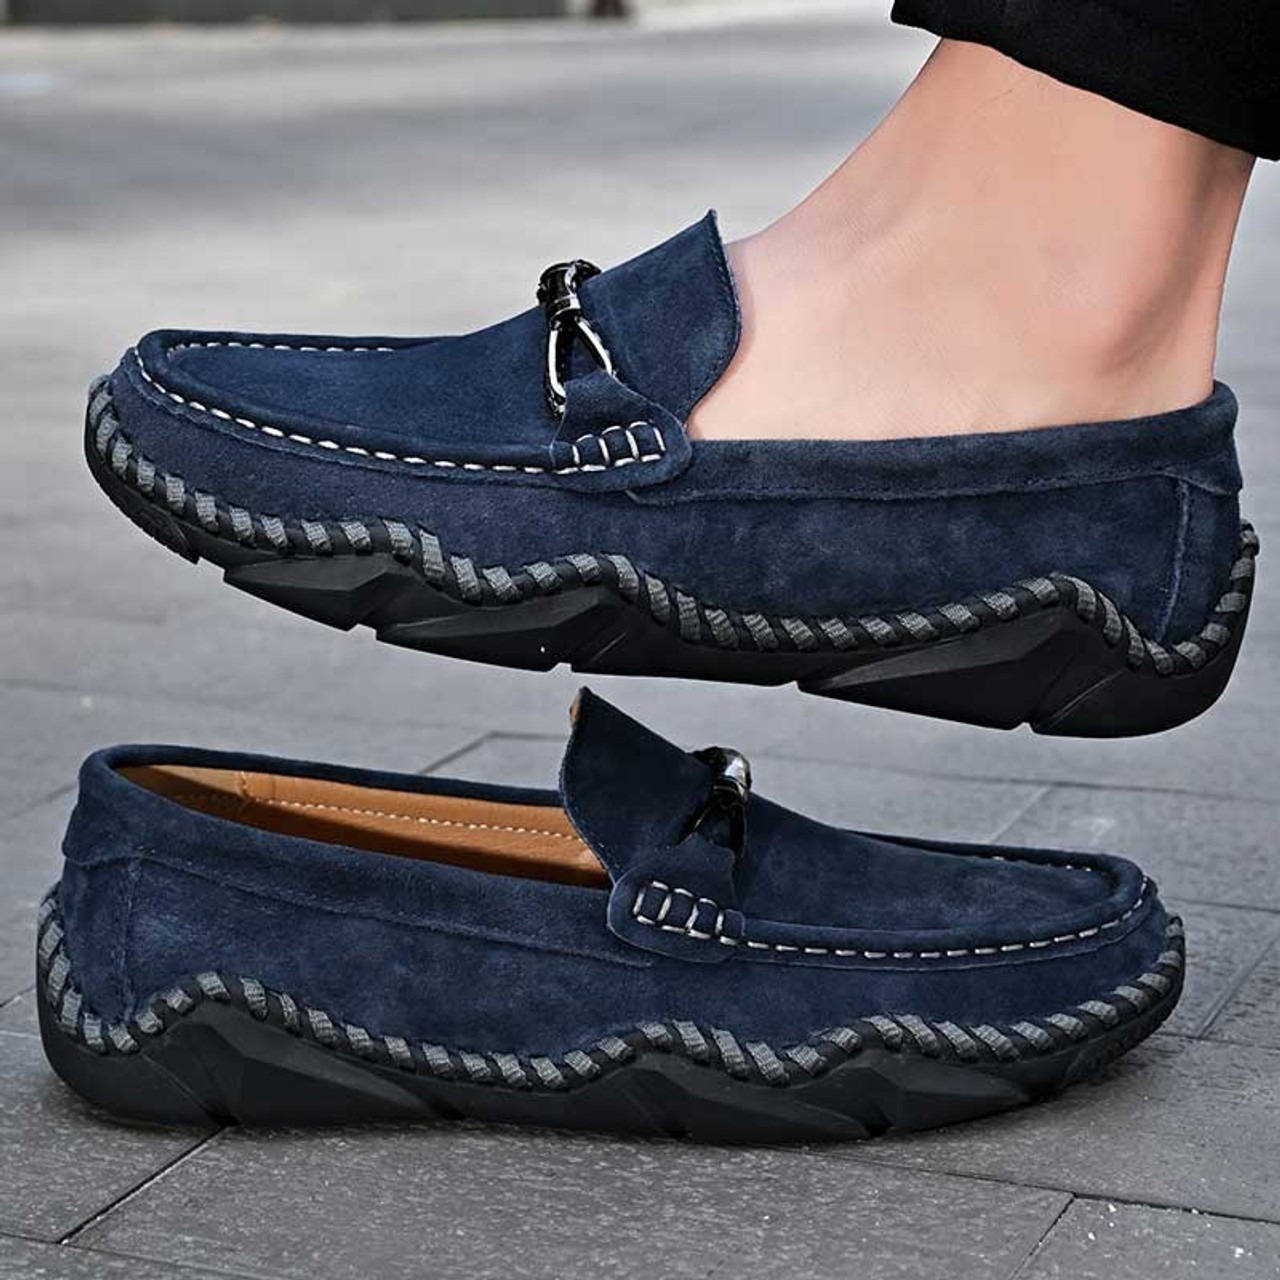 Blue sewing accents metal buckle slip on shoe loafer | Mens shoe ...